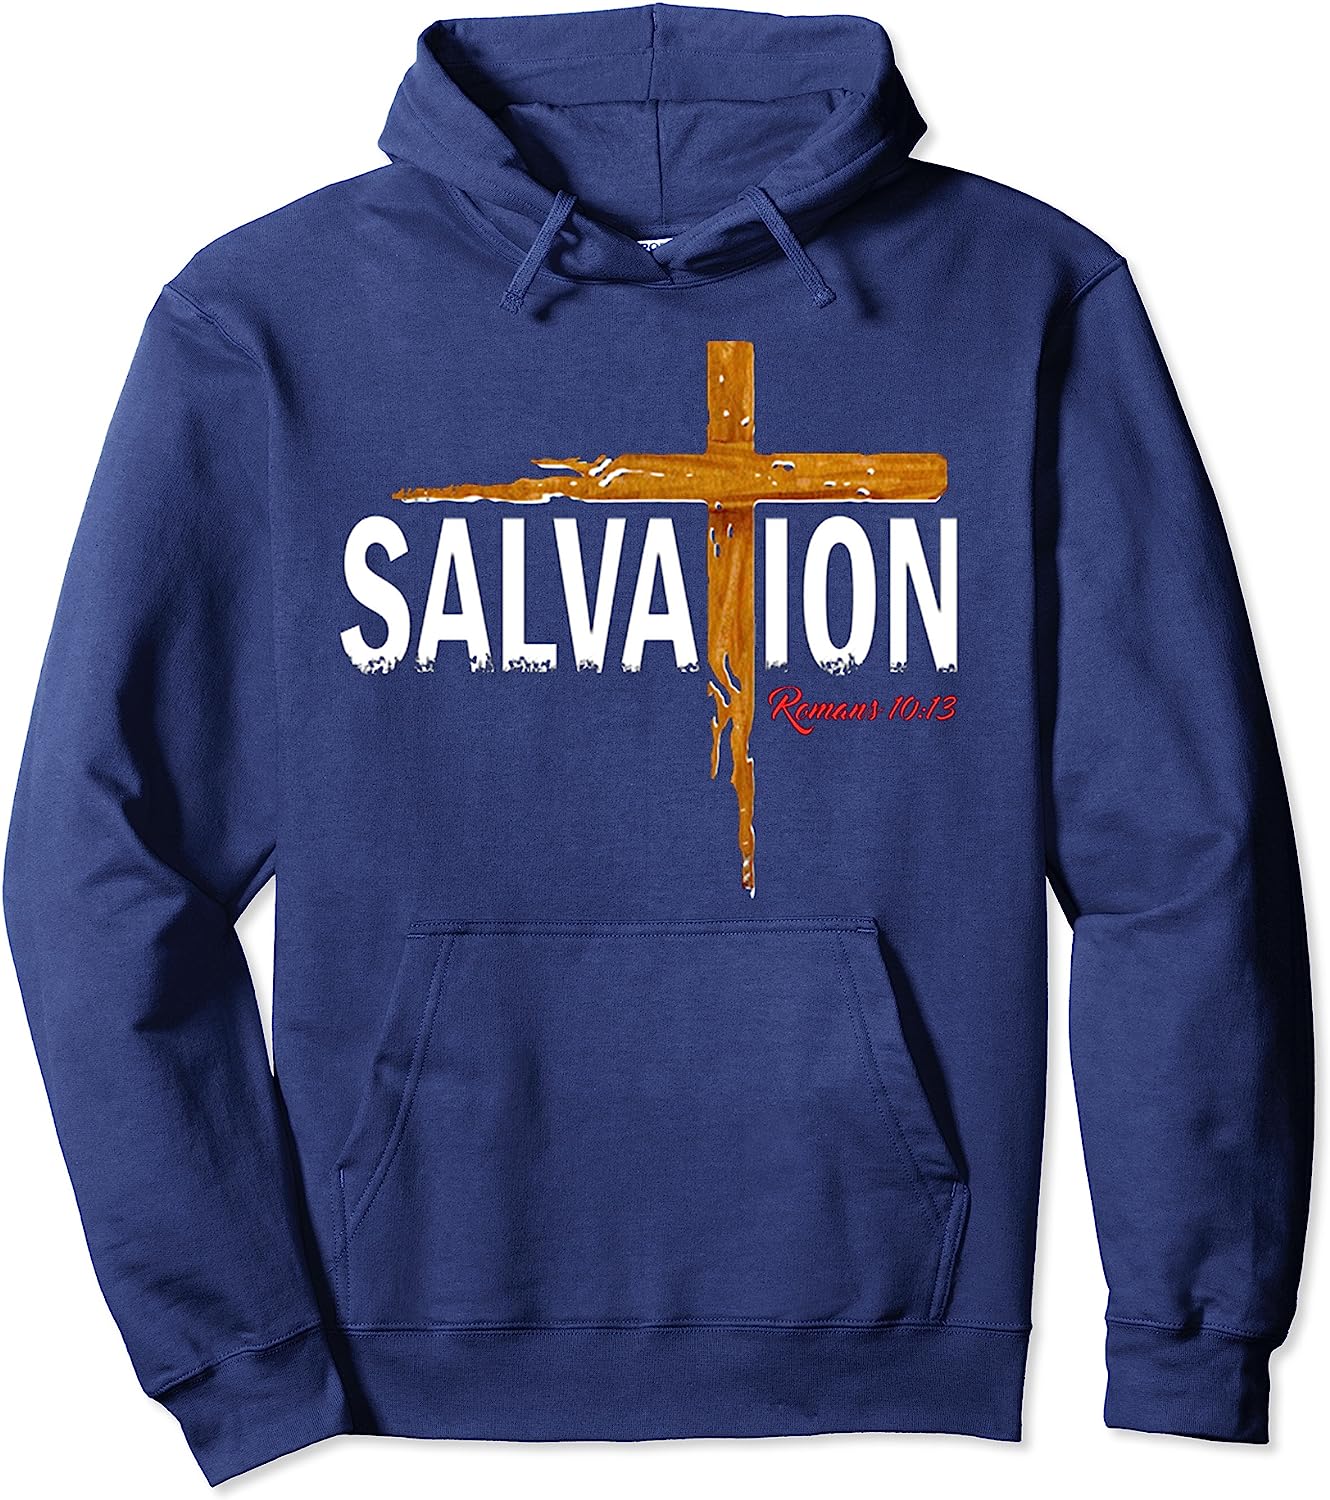 Salvation - Pullover Hoodie - Fun and Inspirational Design by Crucial Key